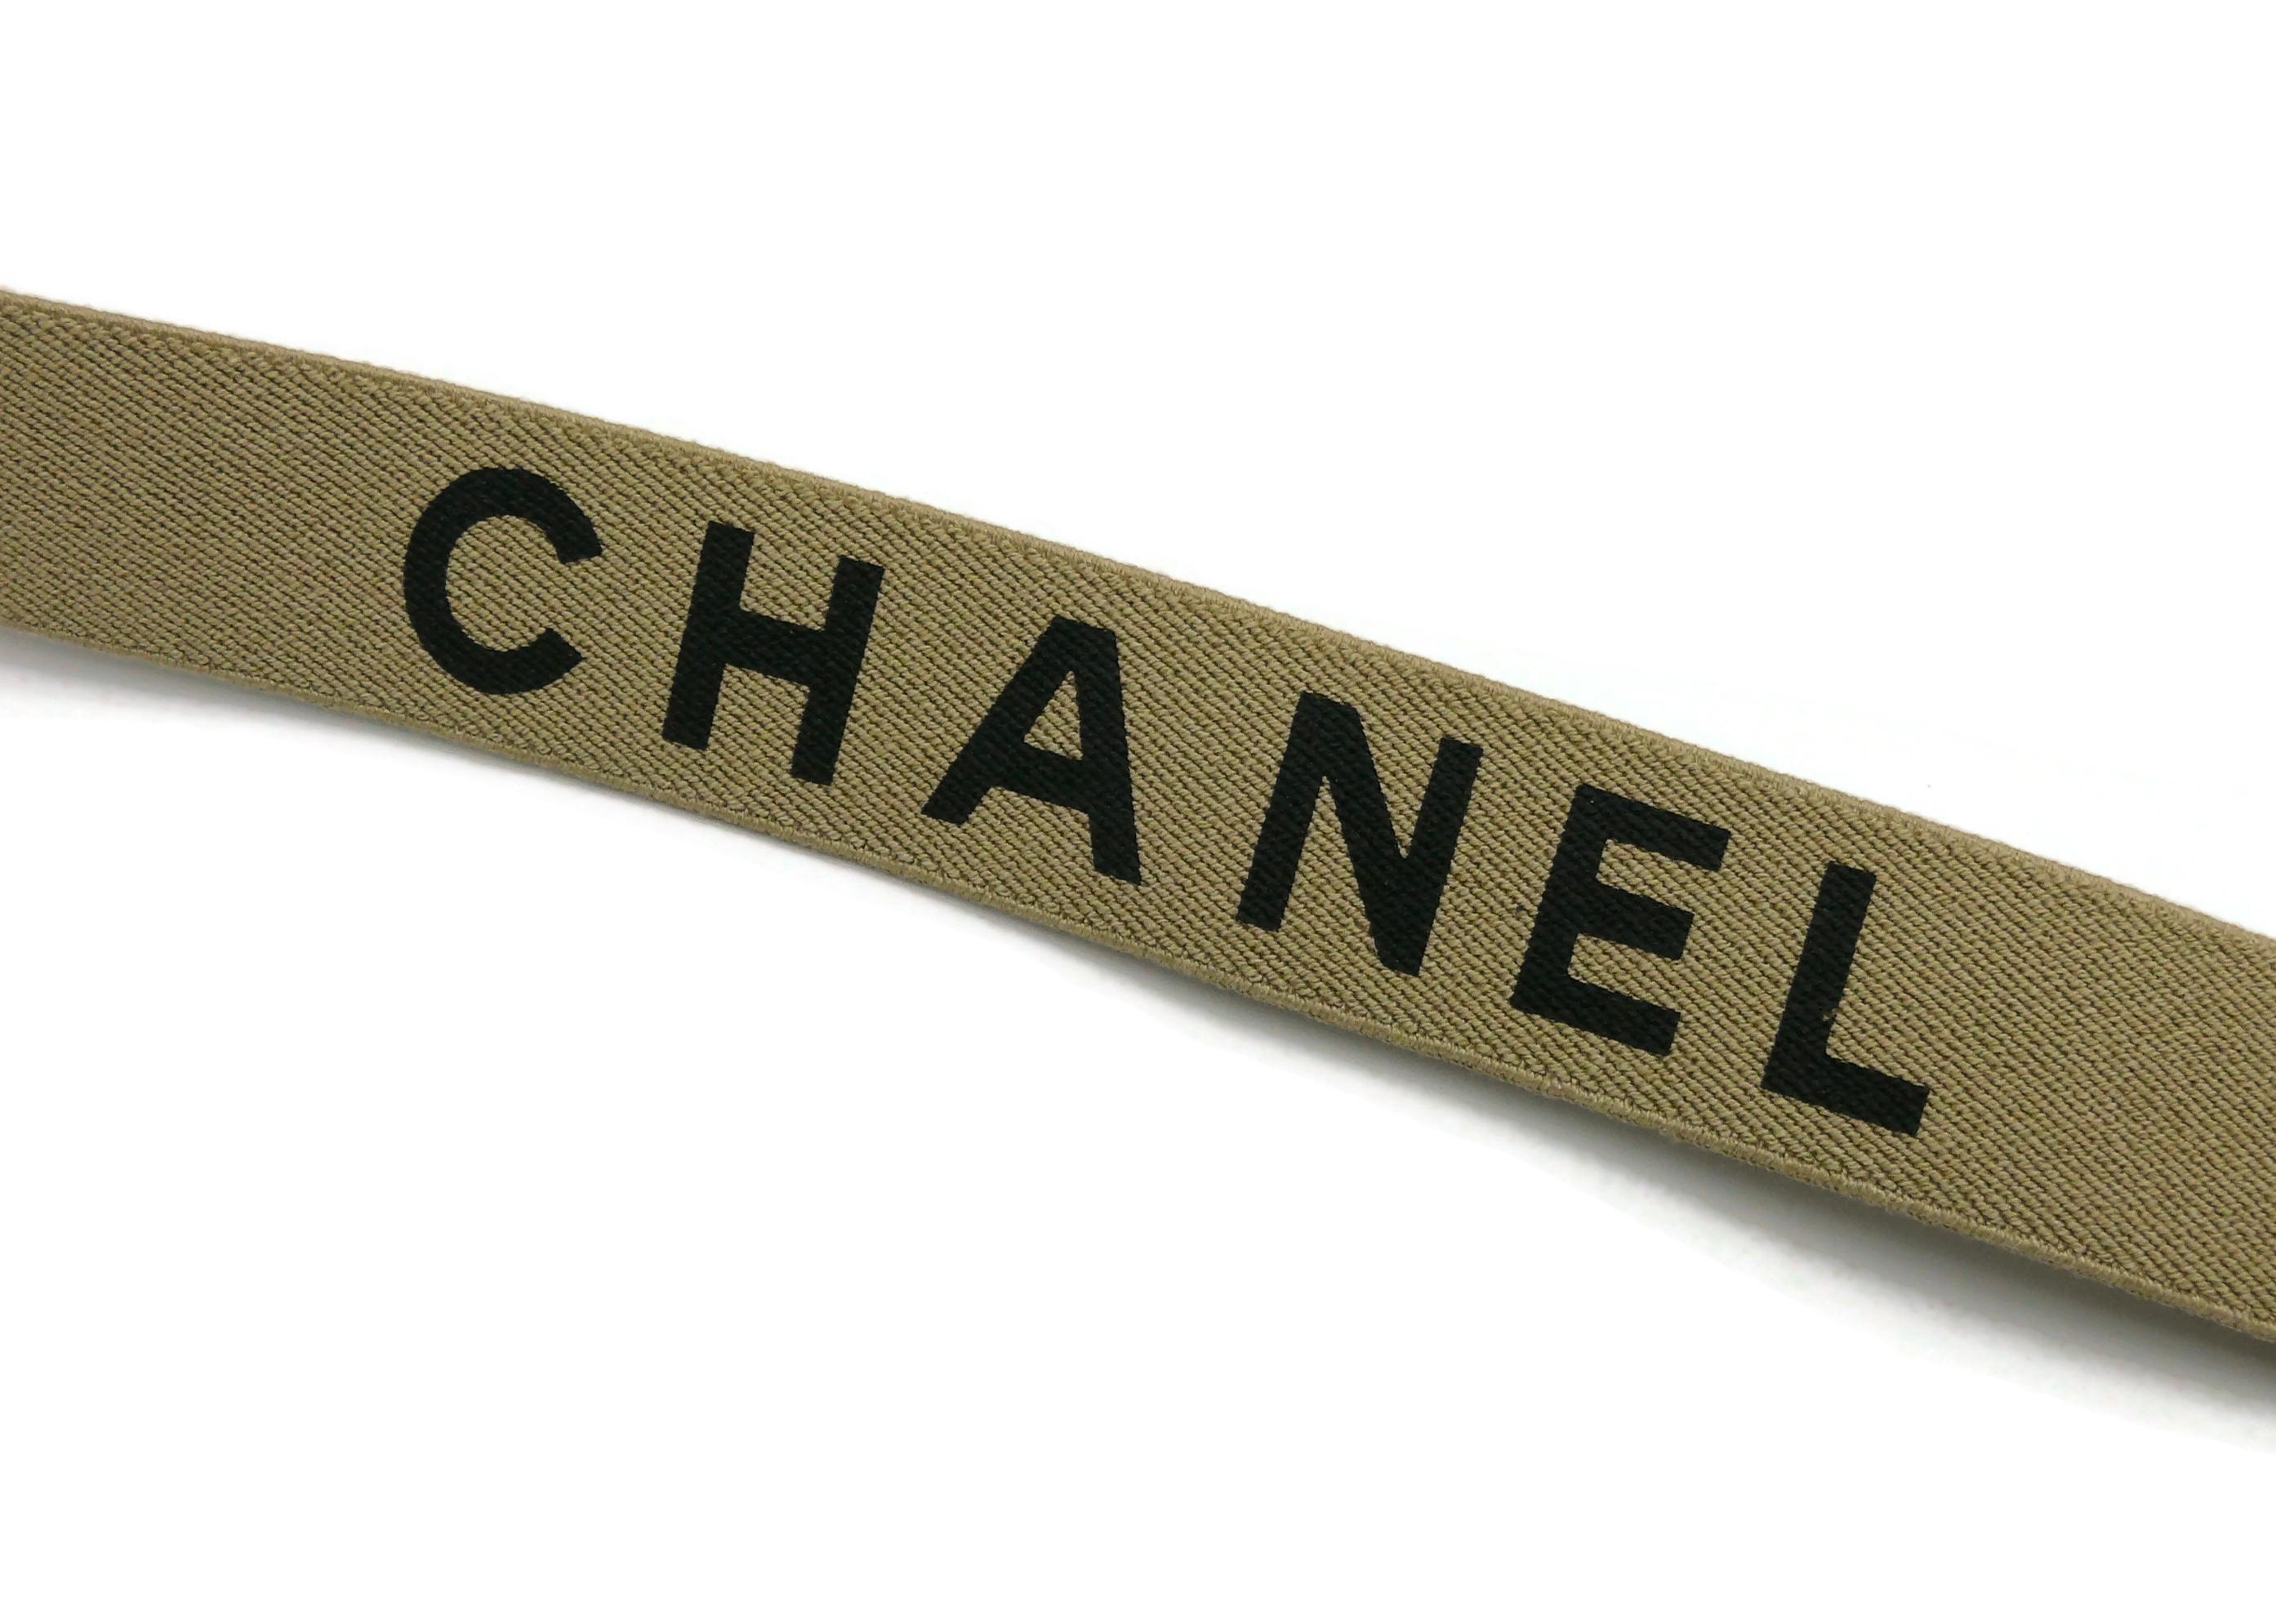 CHANEL by KARL LAGERFELD Vintage Iconic Light Brown and Black Suspenders, 1994 im Angebot 5